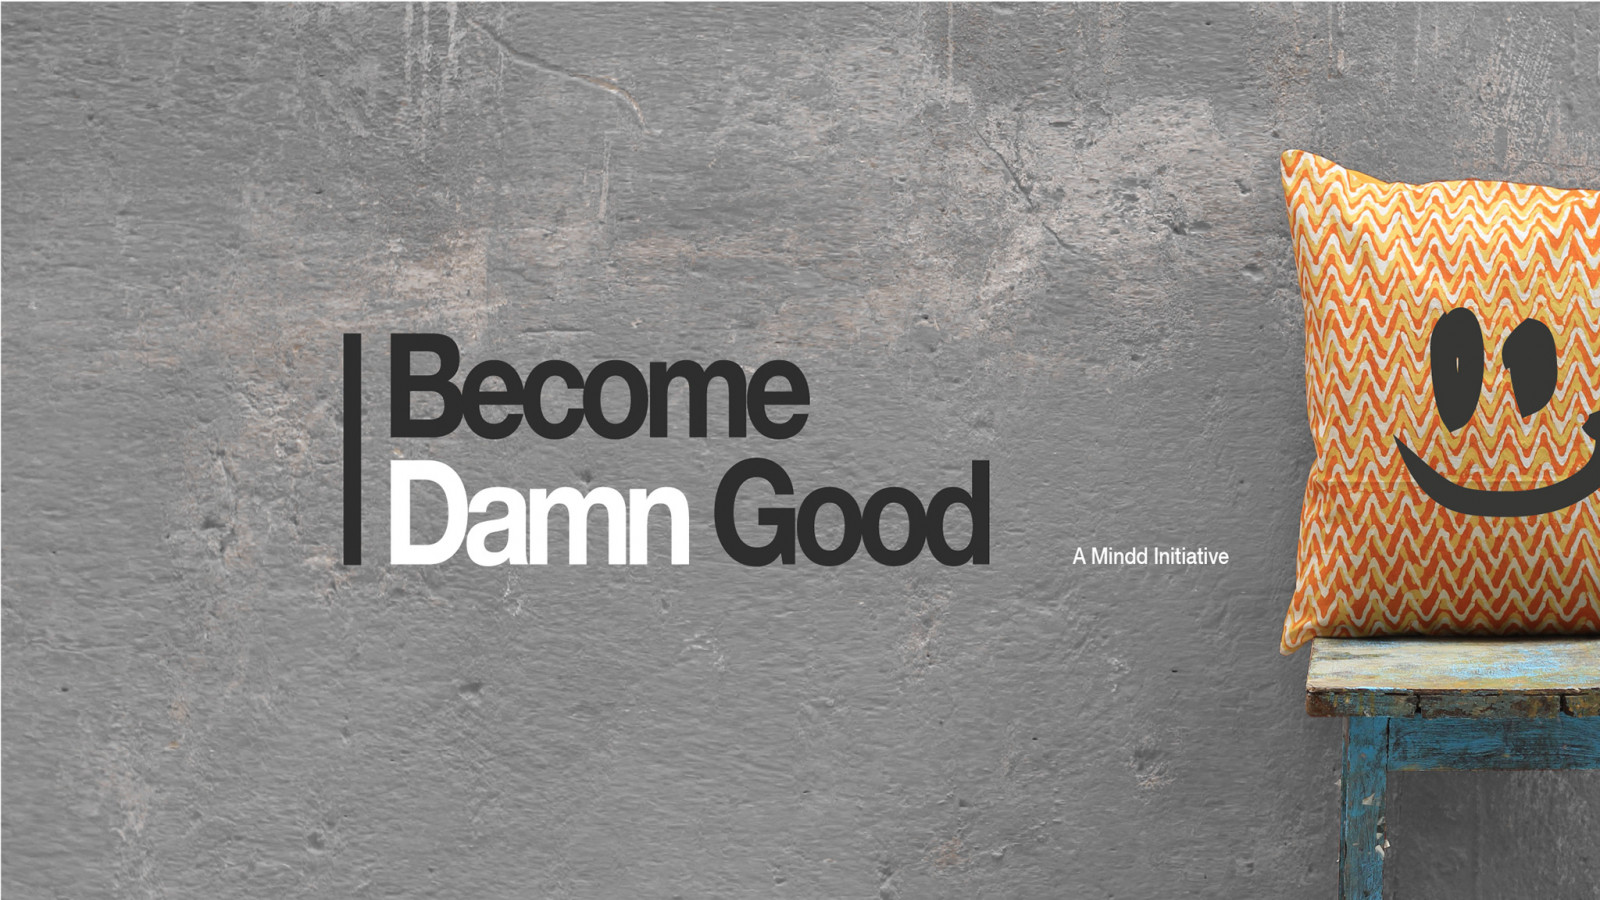 Become Damn Good: The power of purpose and making a difference